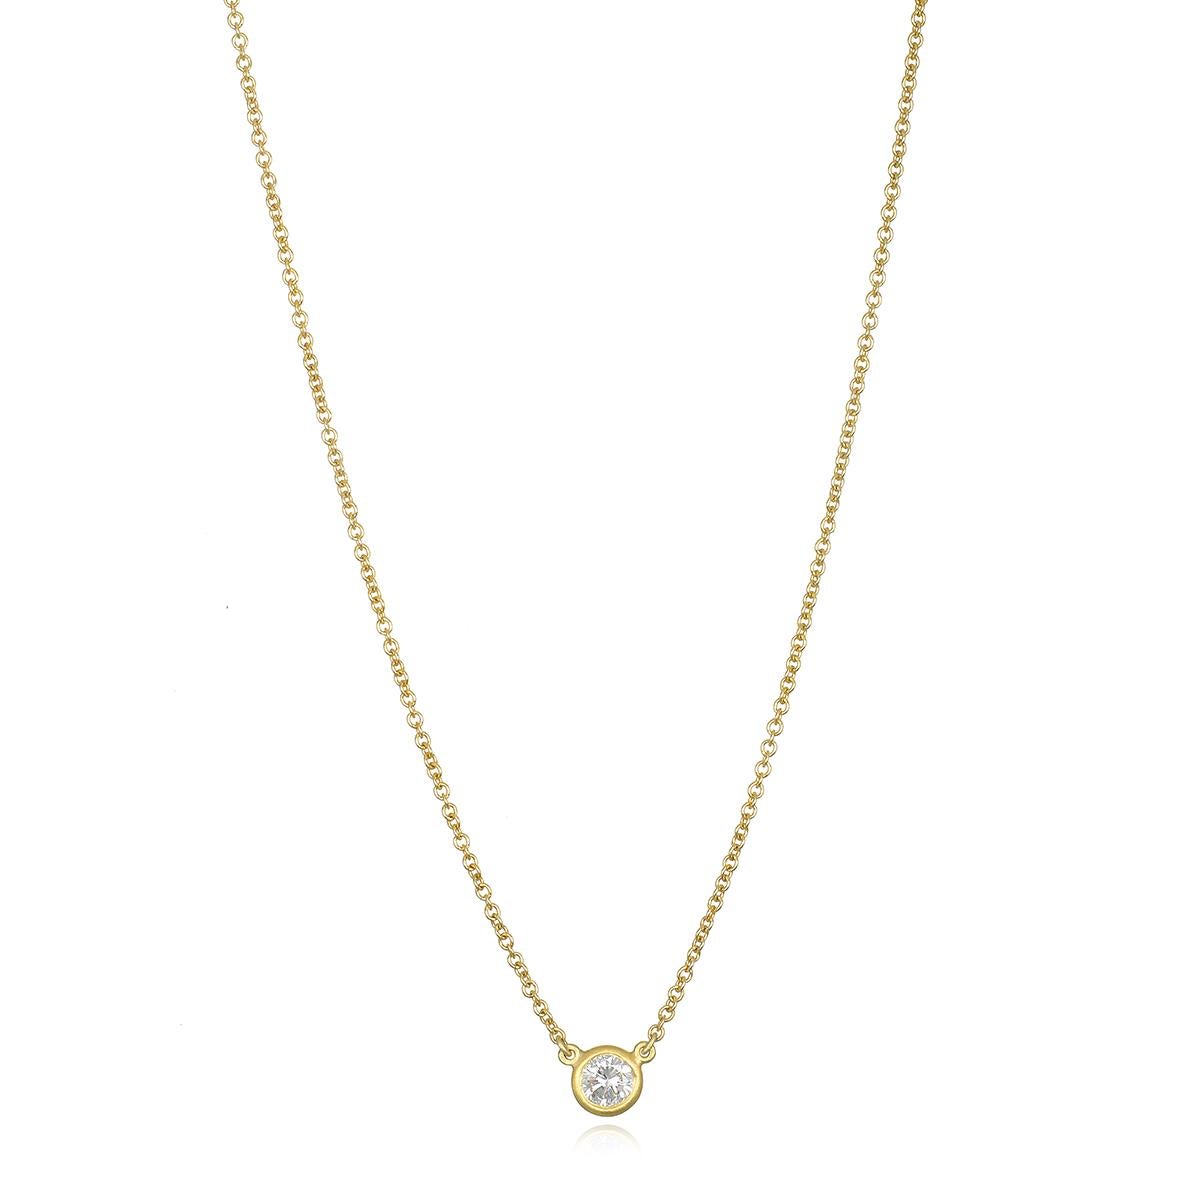 Set in 18 karat gold, the solitaire diamond necklace features a sparkling round brilliant cut diamond in a thin clean bezel. Wear alone or layered for a look that is timeless and perfect for every day.  

Total length 16